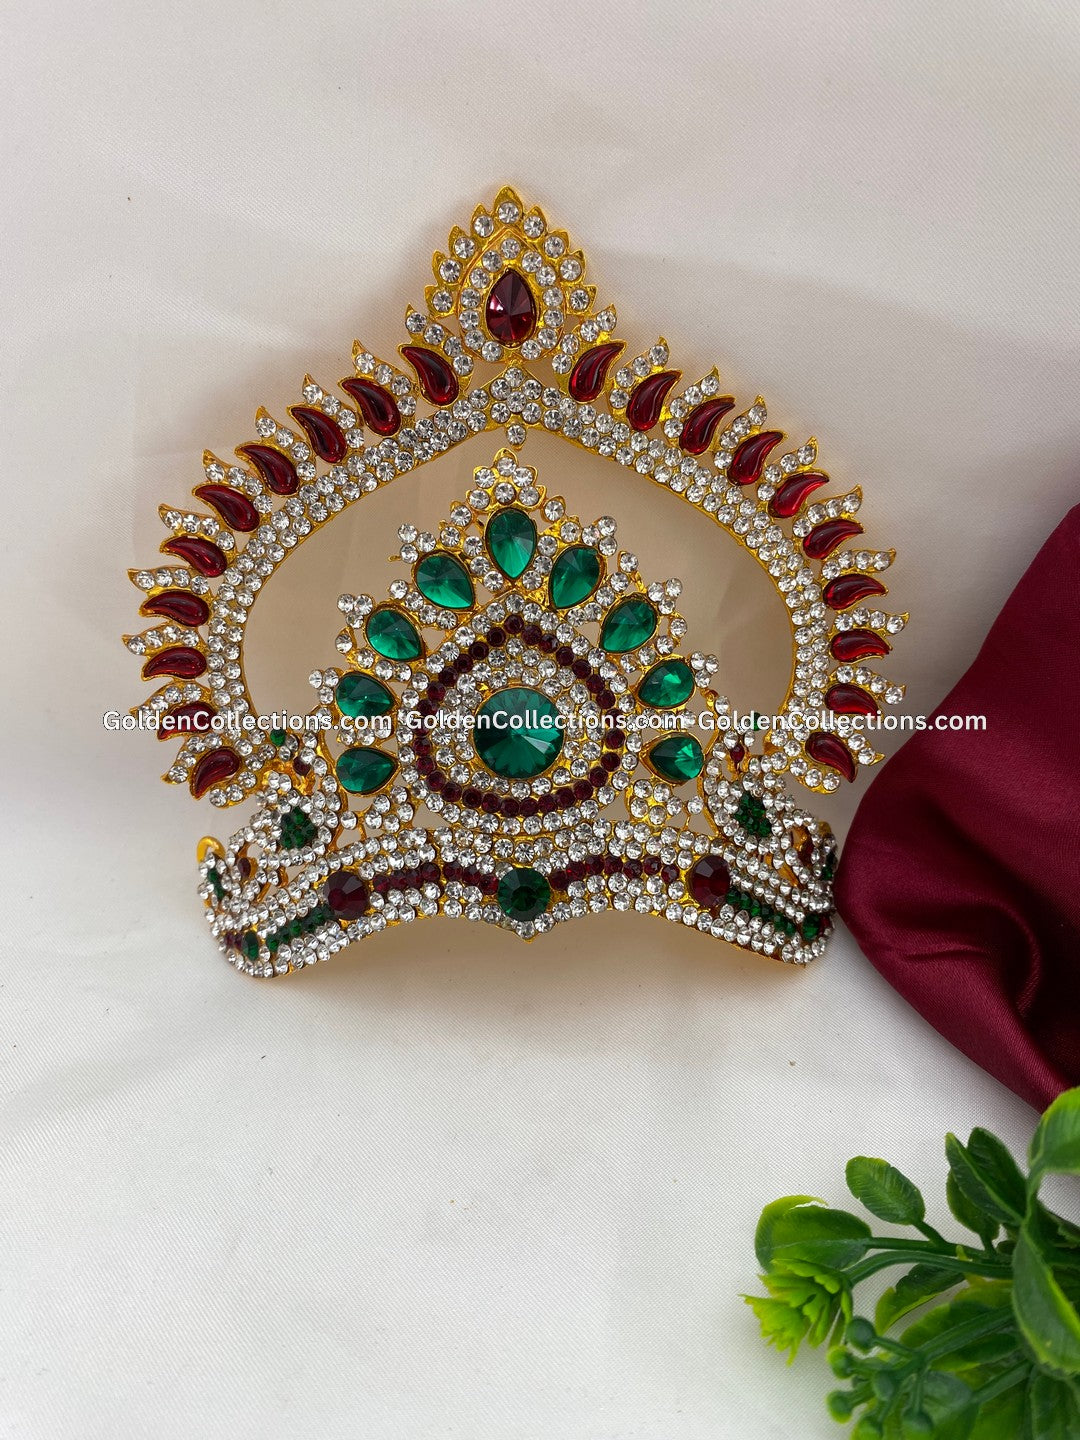 Ornamental Crown for God - GoldenCollections DGC-060